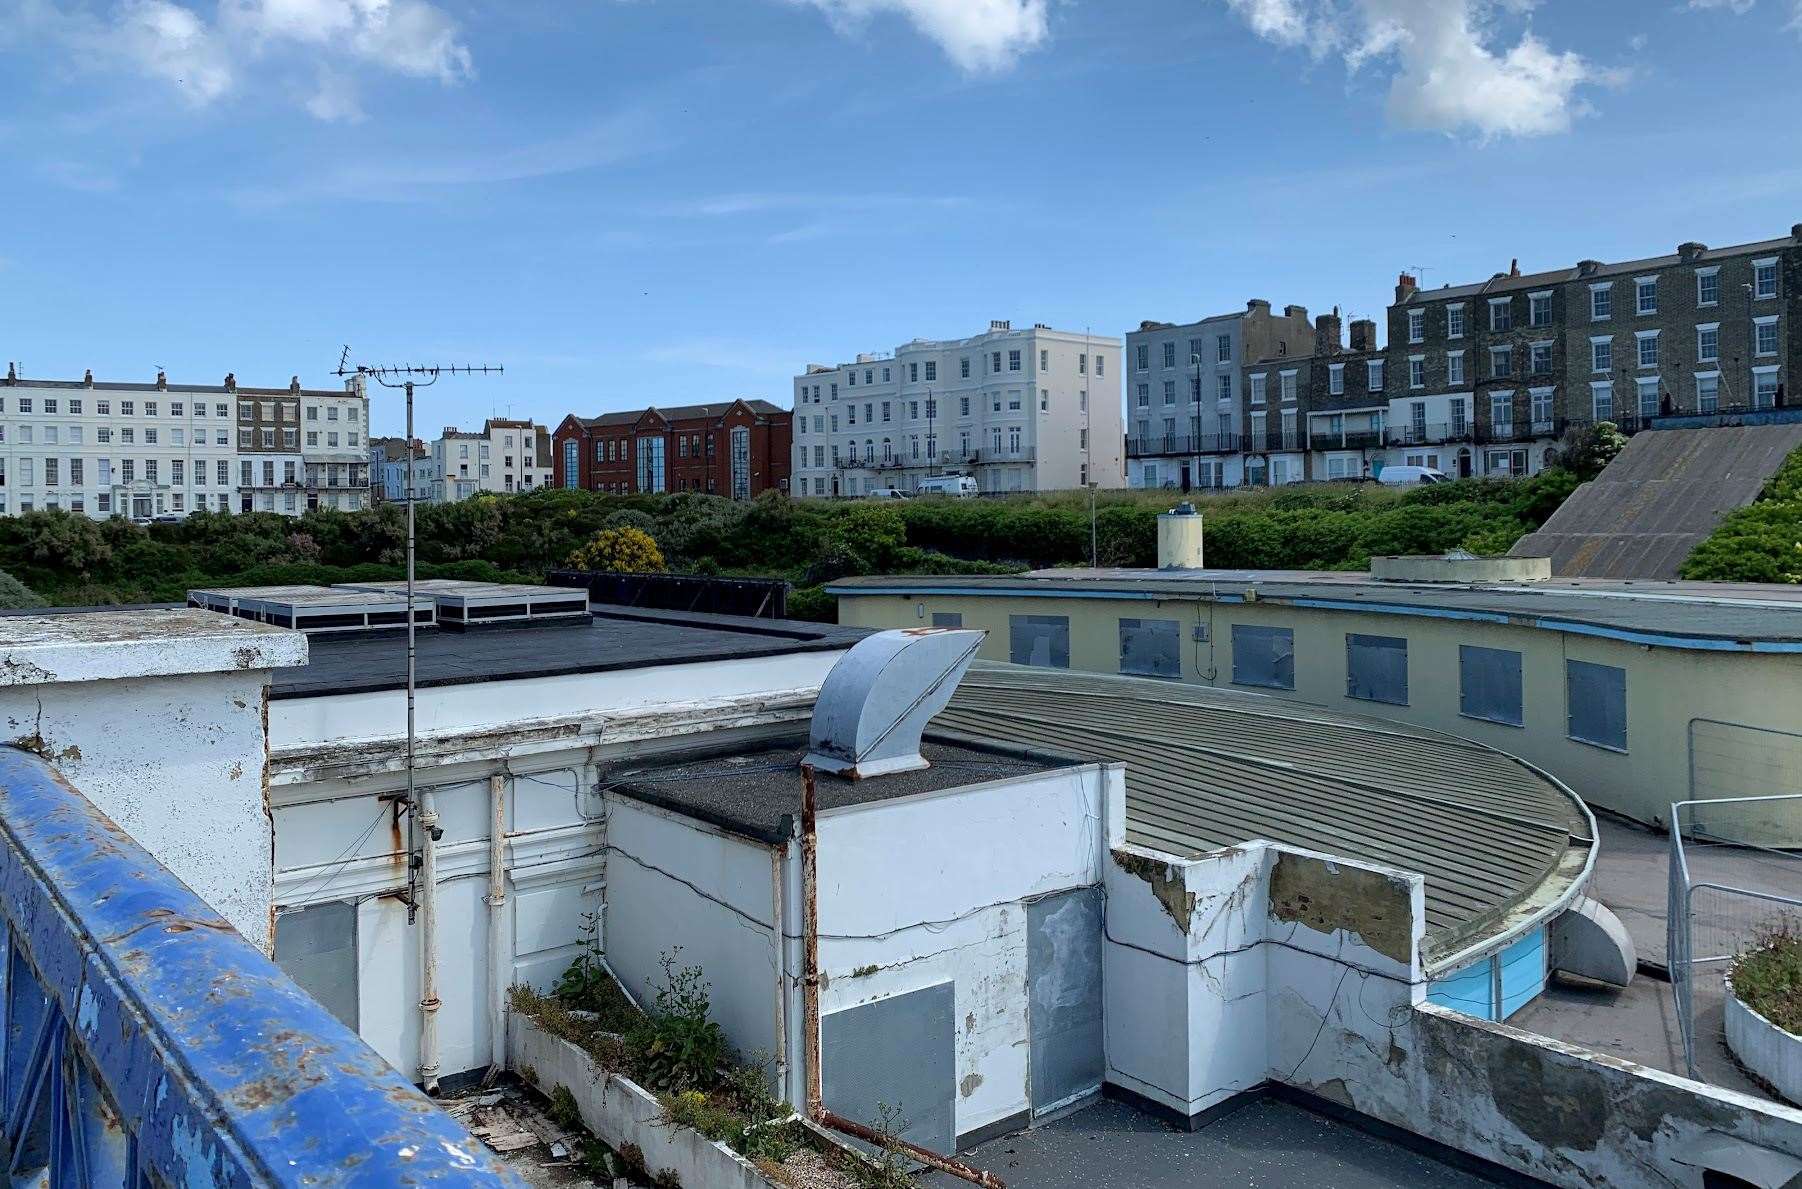 The Winter Gardens, Margate closed in August 2022